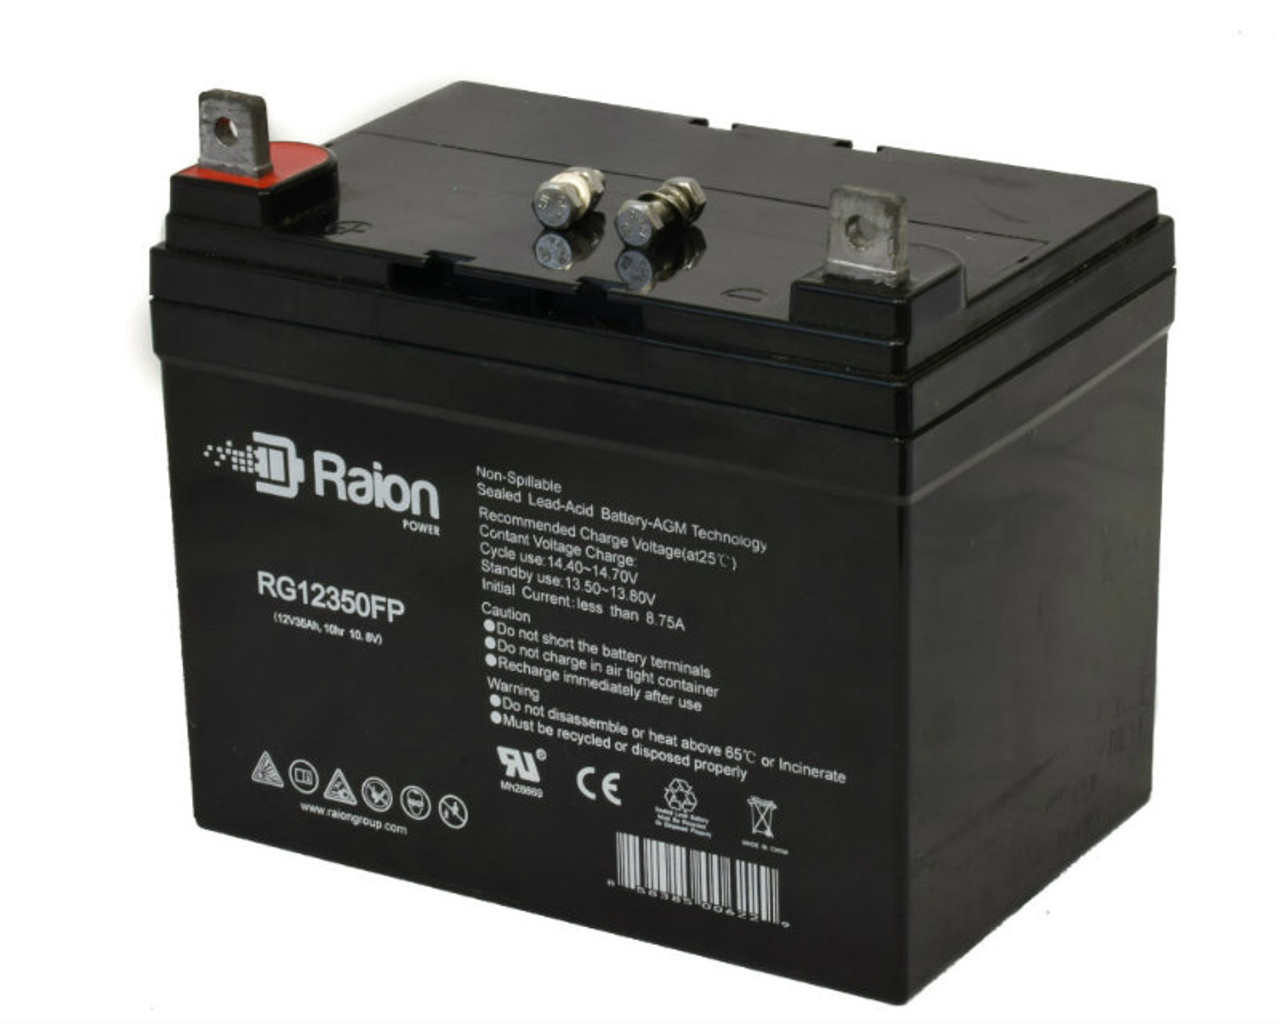 Raion Power Replacement 12V 35Ah Battery for Yard-Man U604G - 1 Pack